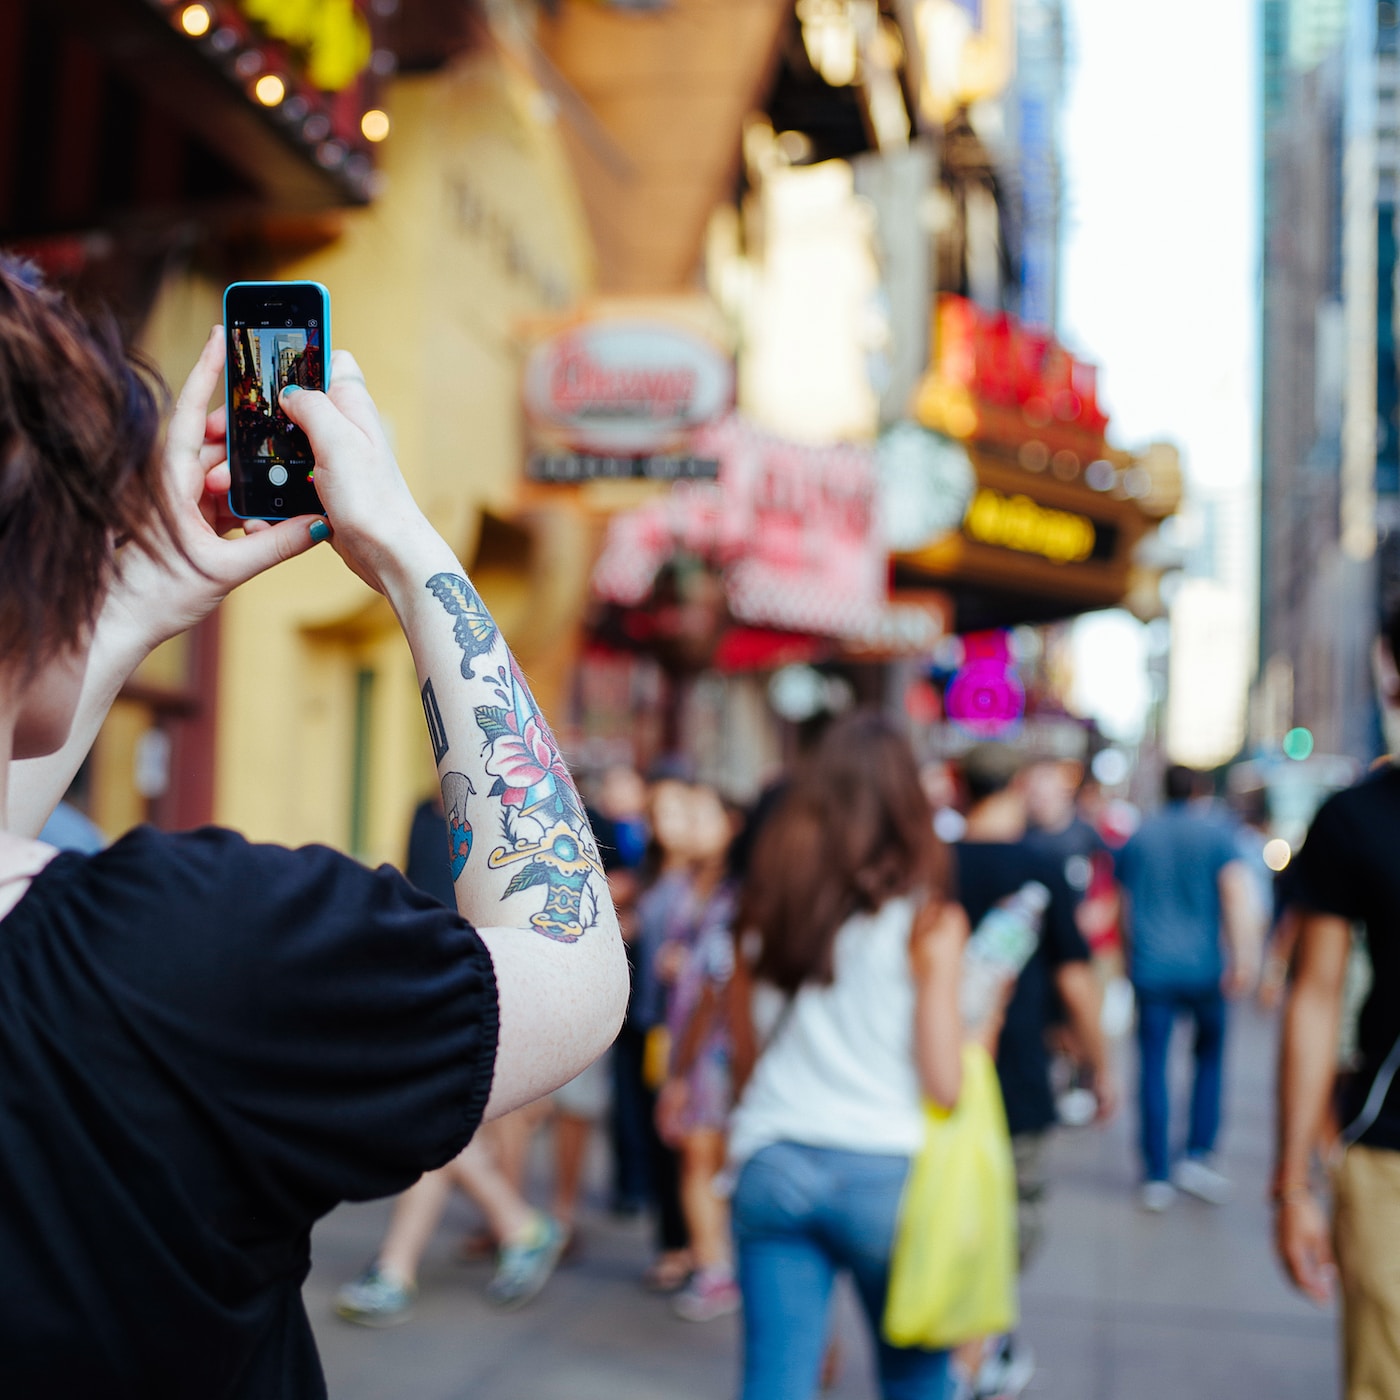 Authoritative Tips for How to Take Instagram-worthy Travel Photos ...